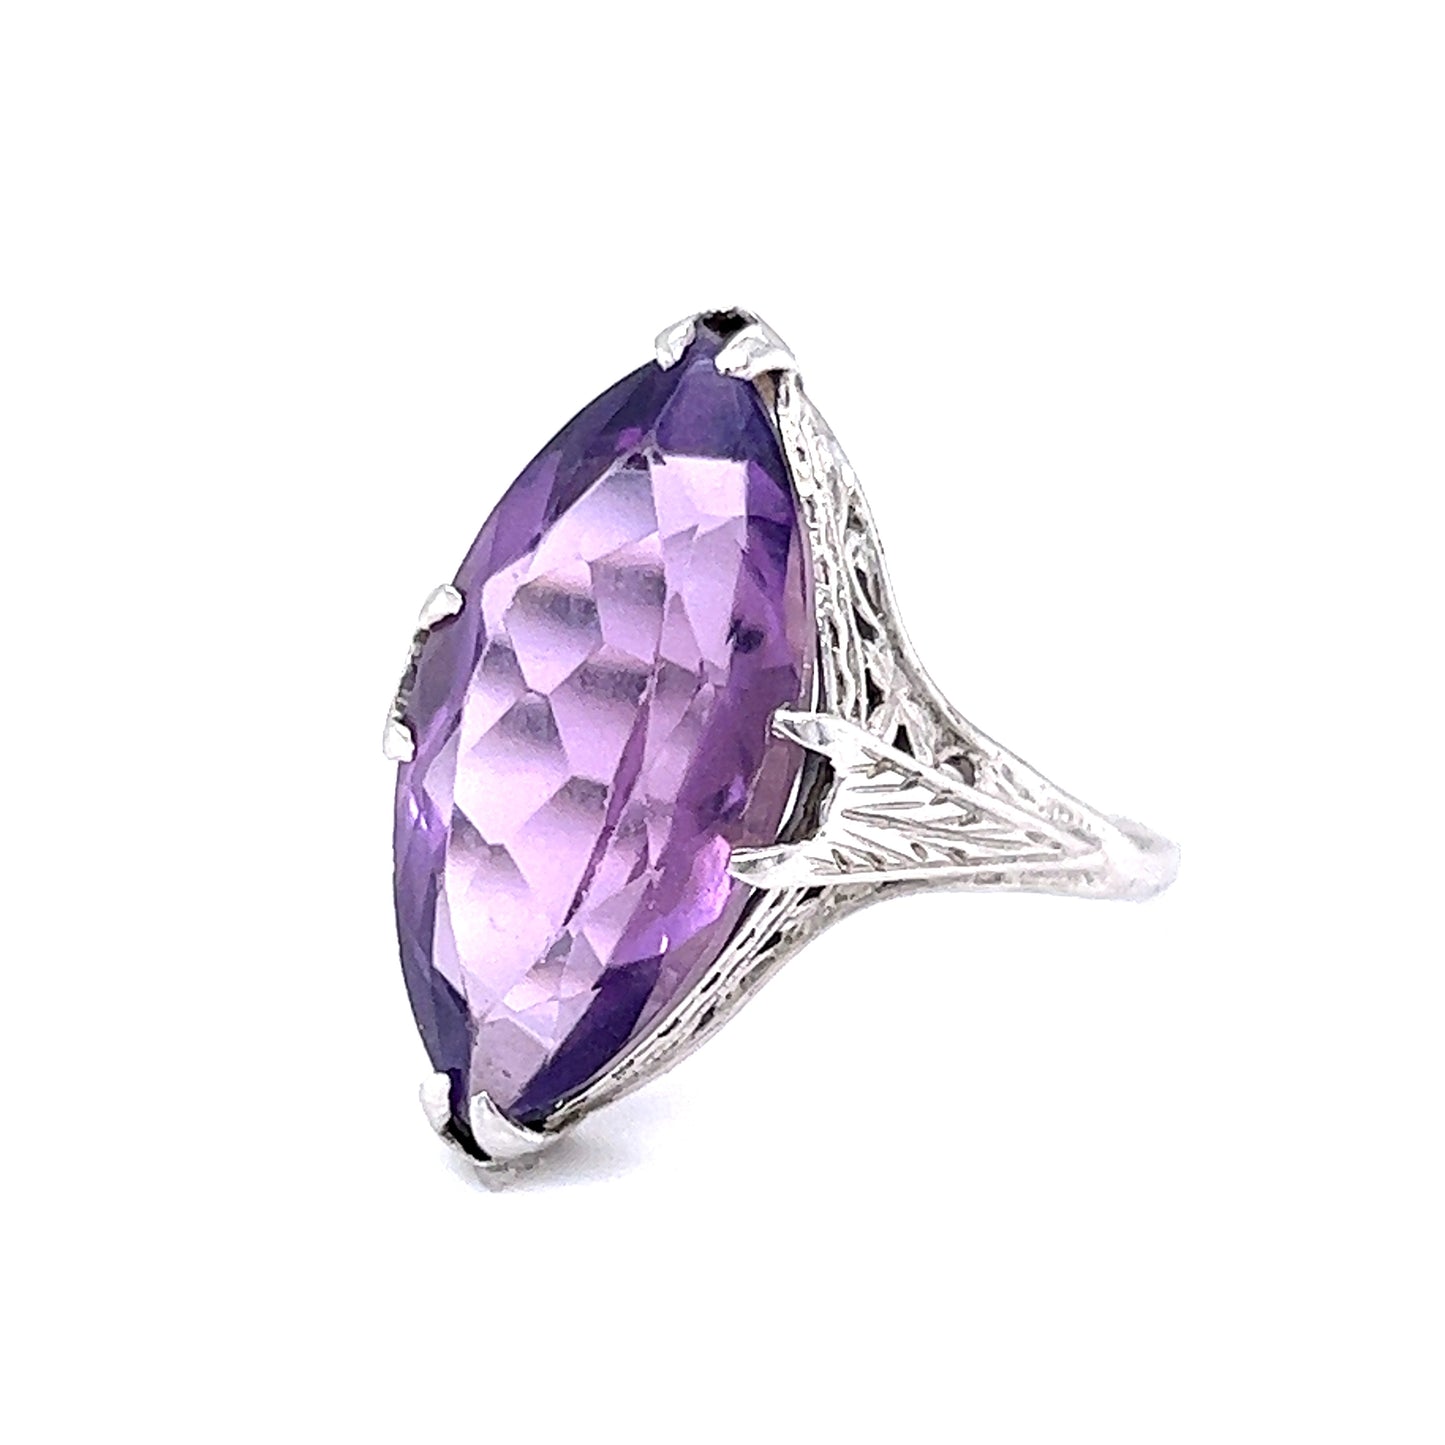 Vintage Marquise Cut Amethyst Cocktail Ring in 18k White Gold